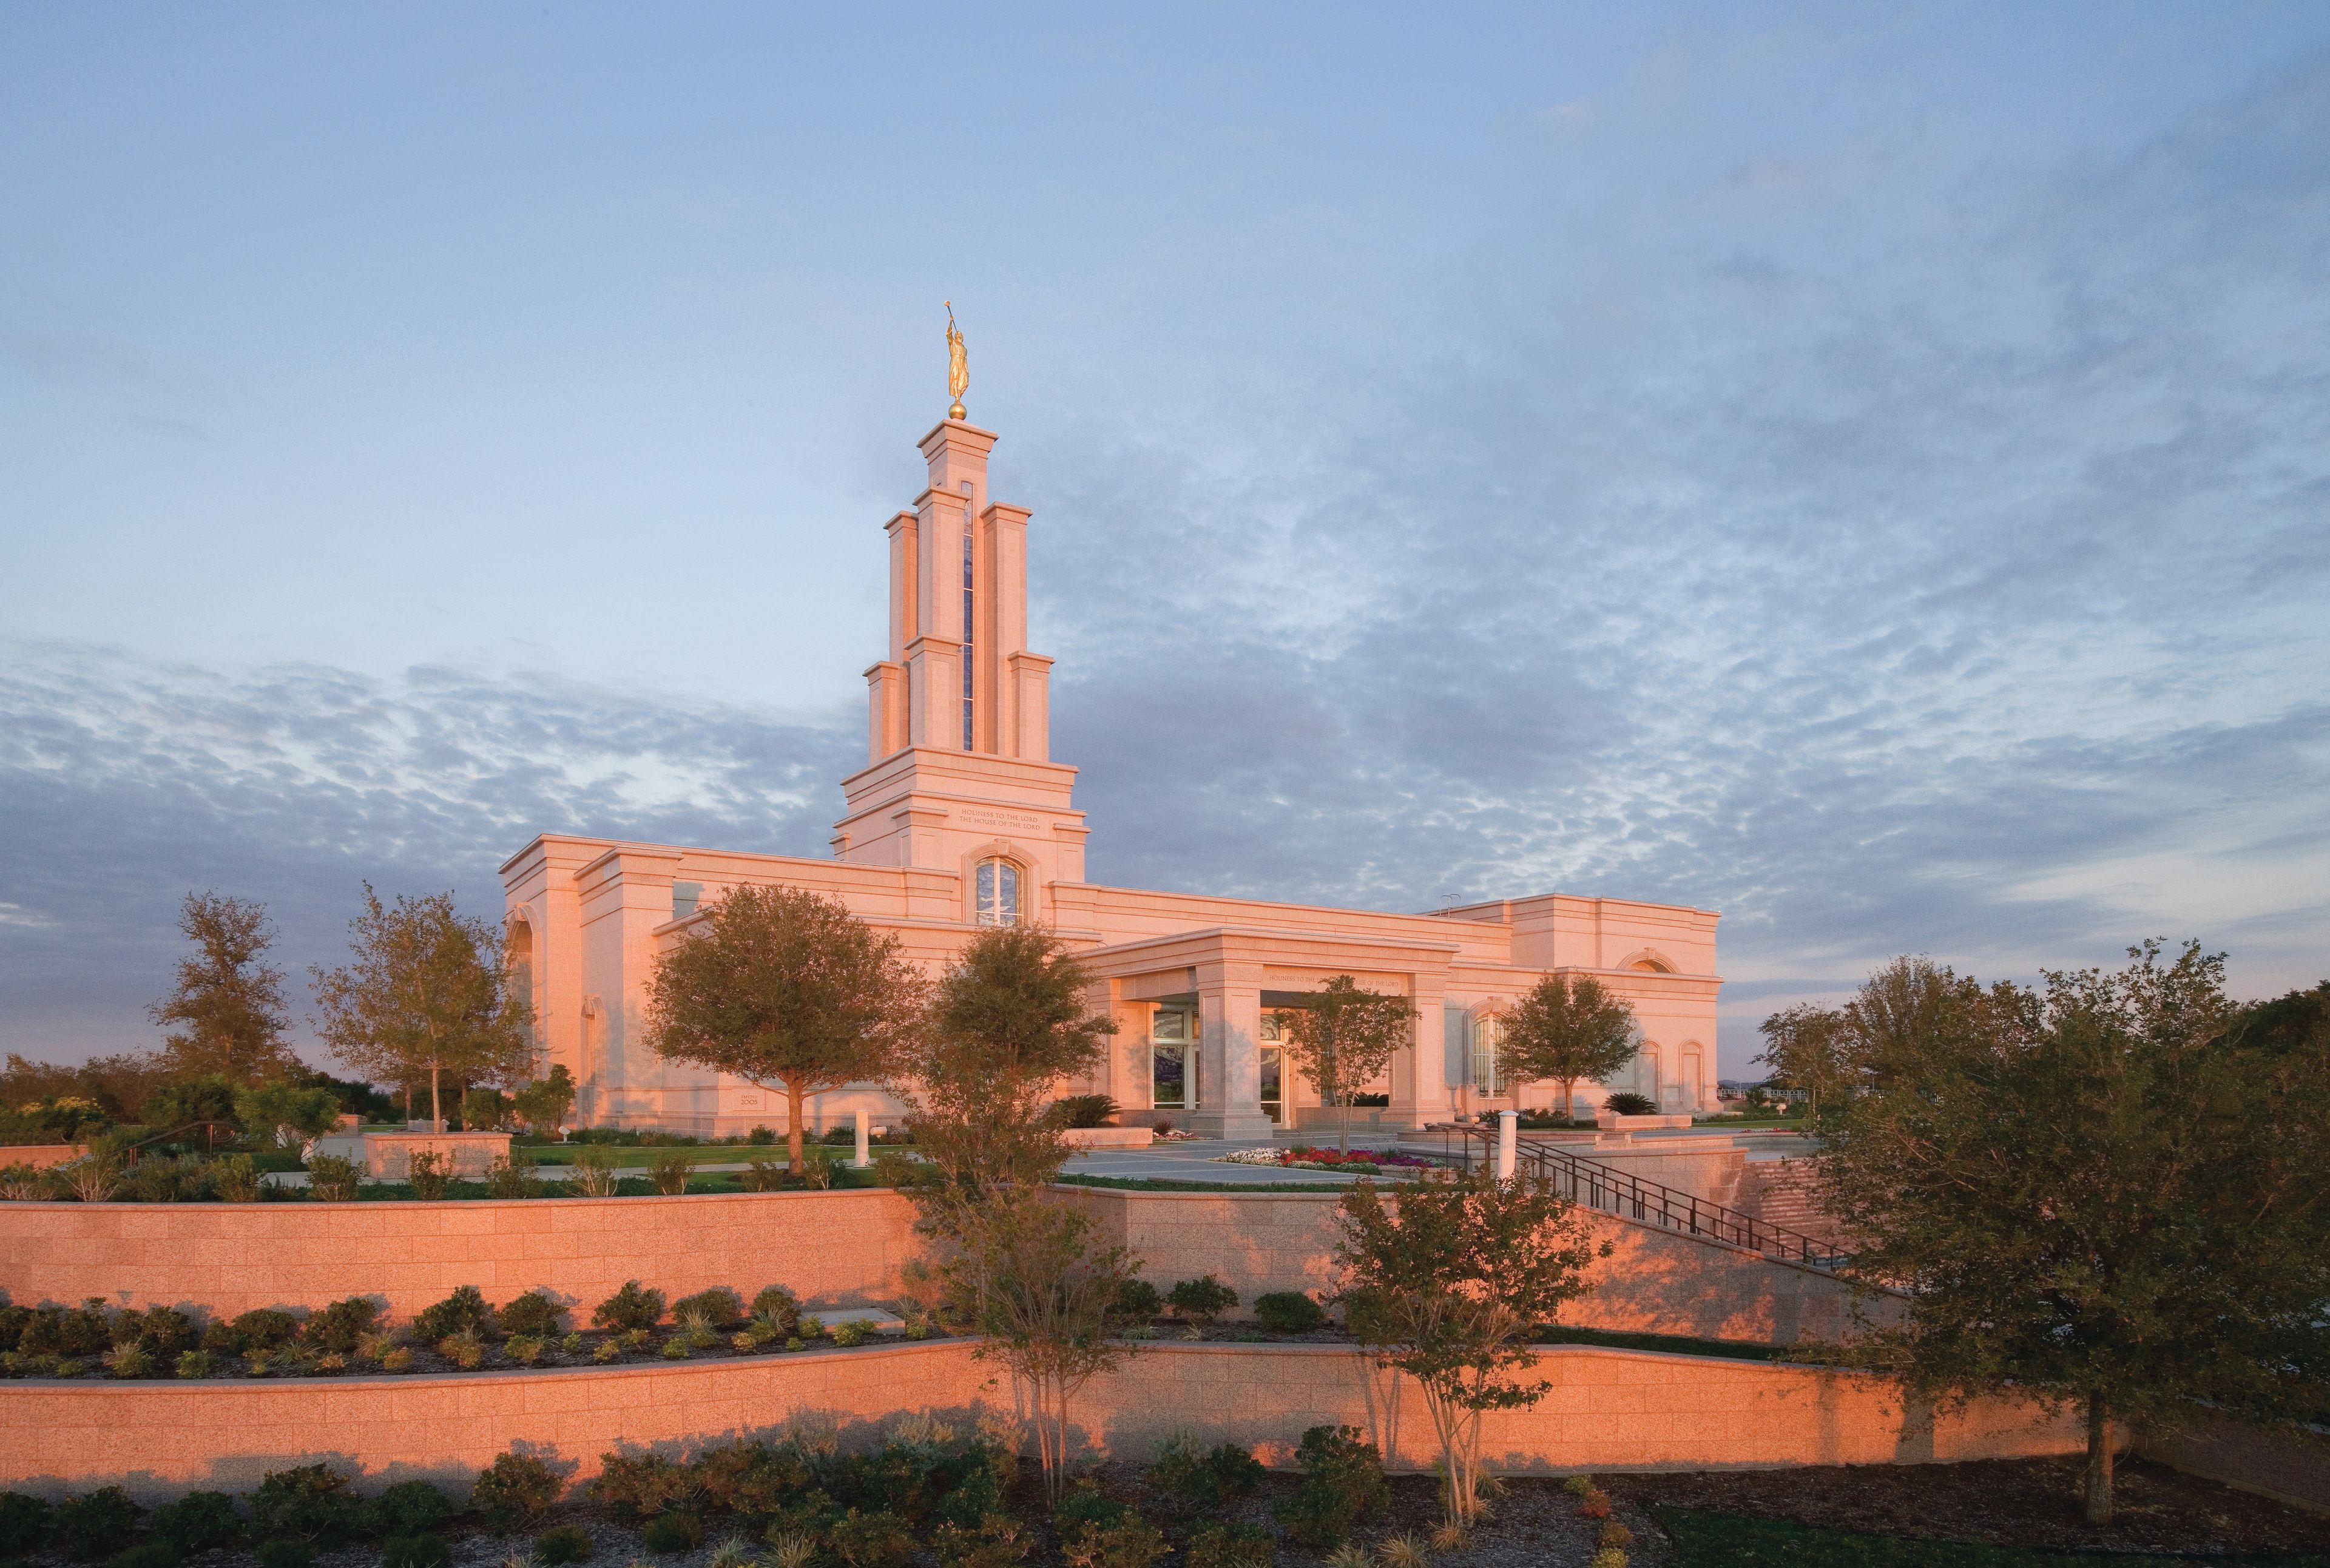 The San Antonio Texas Temple during sunset, including the entrance and scenery.